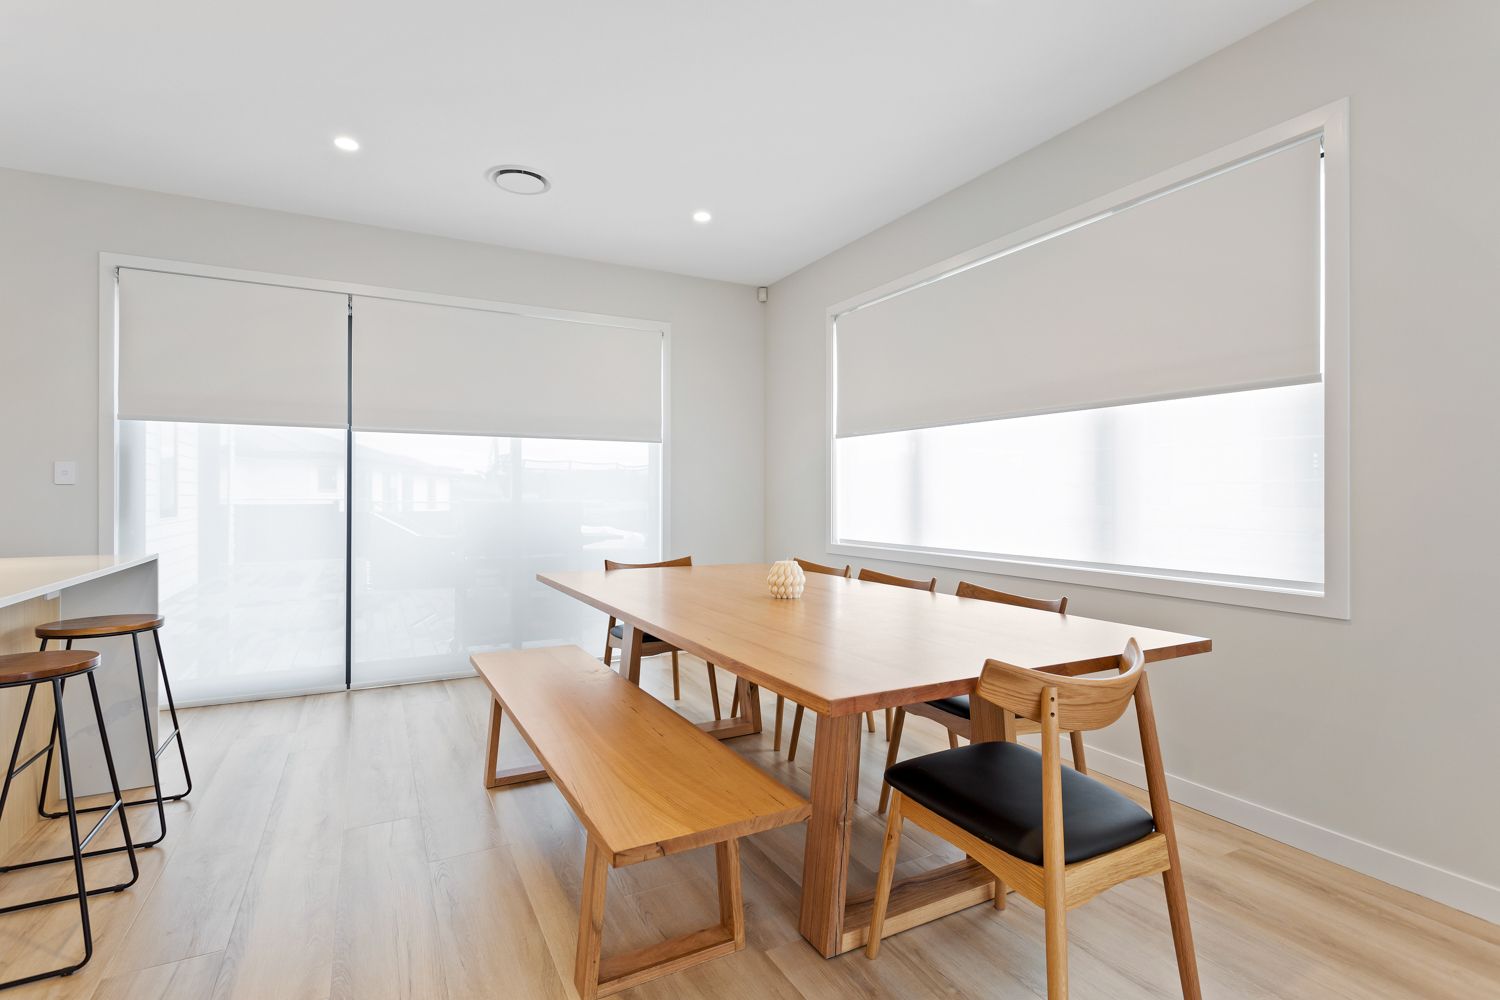 Featured image for “Sunscreens or Roller Blinds – Balancing Light & Privacy”